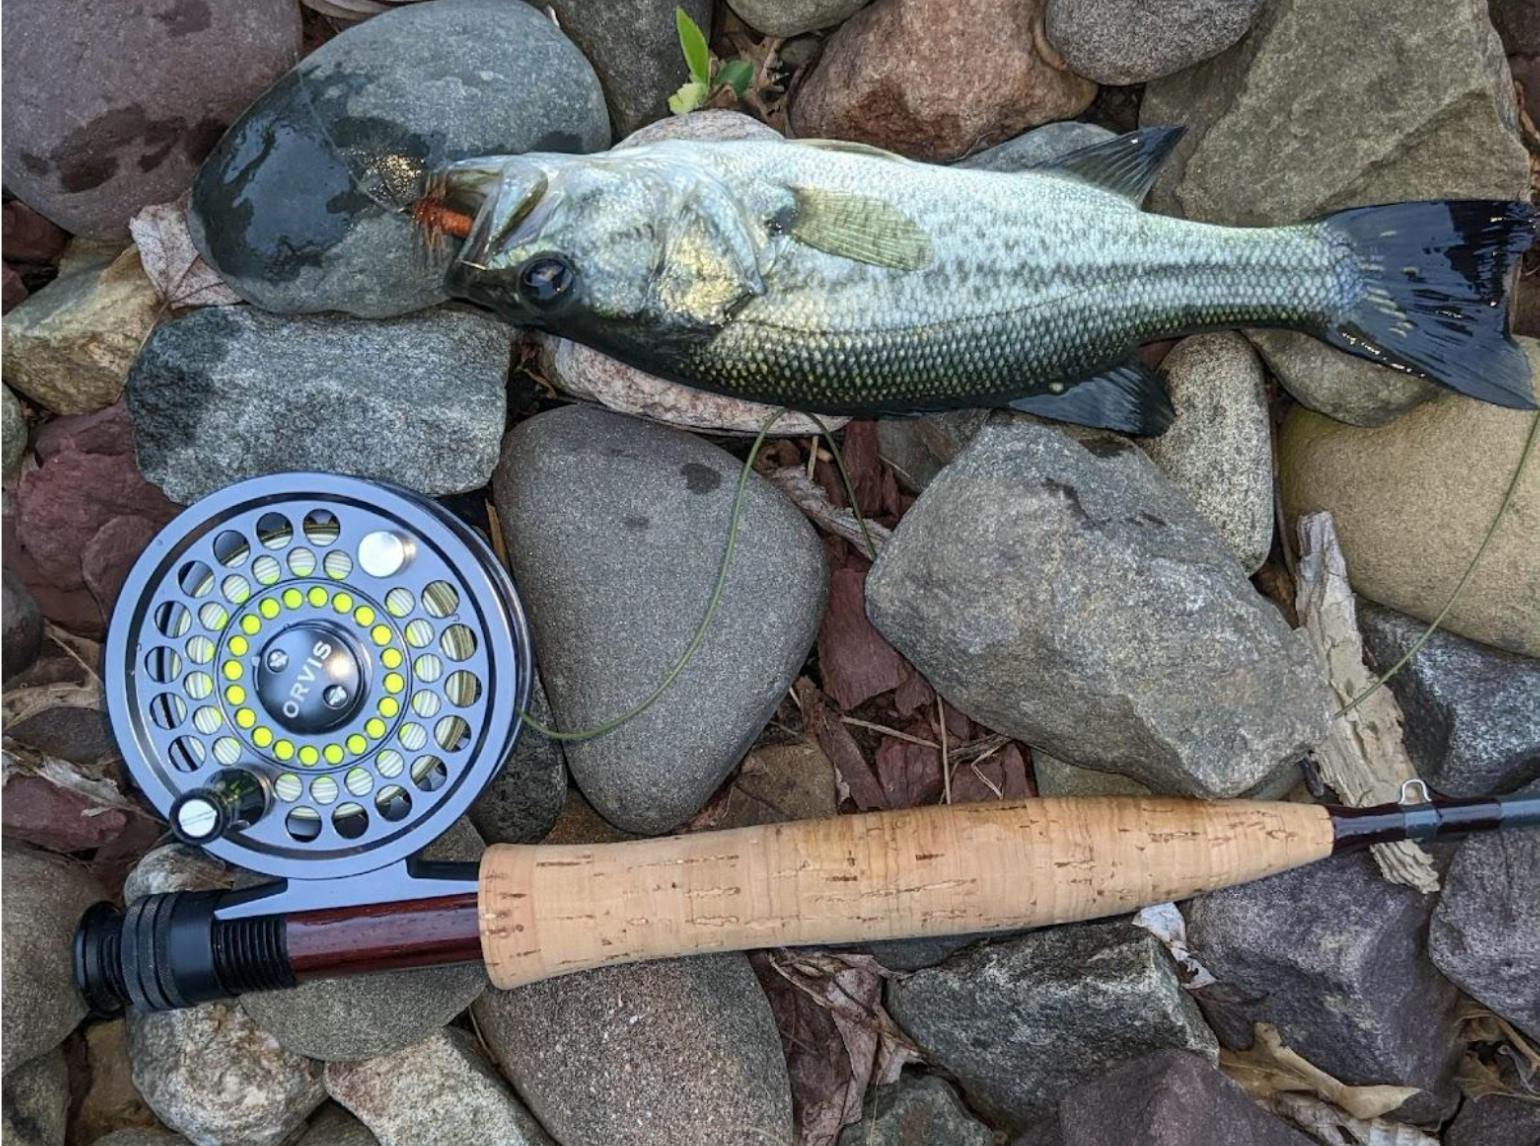 A fish lying next to the Orvis Battenkill Reel.